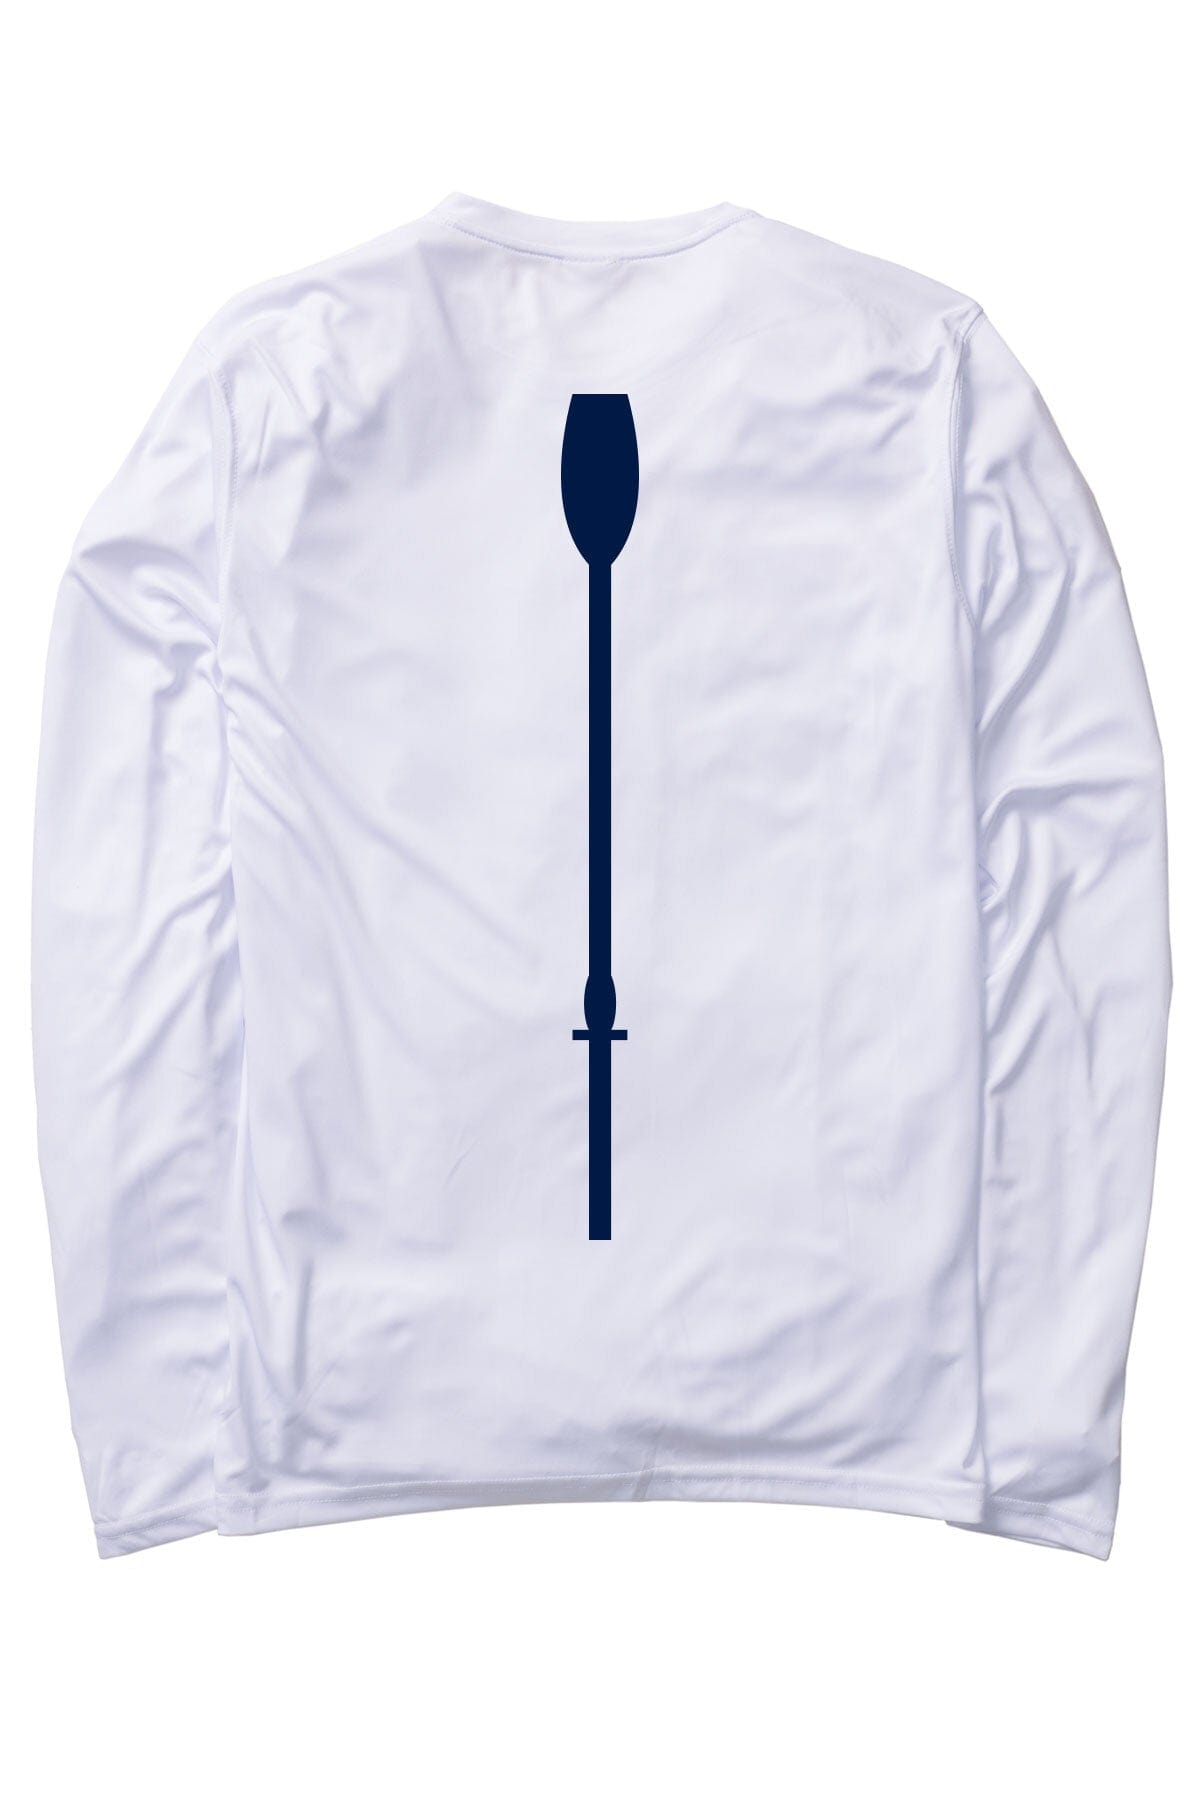 Back of Unisex UV Protection U.S. Rowing and Oar Long Sleeve